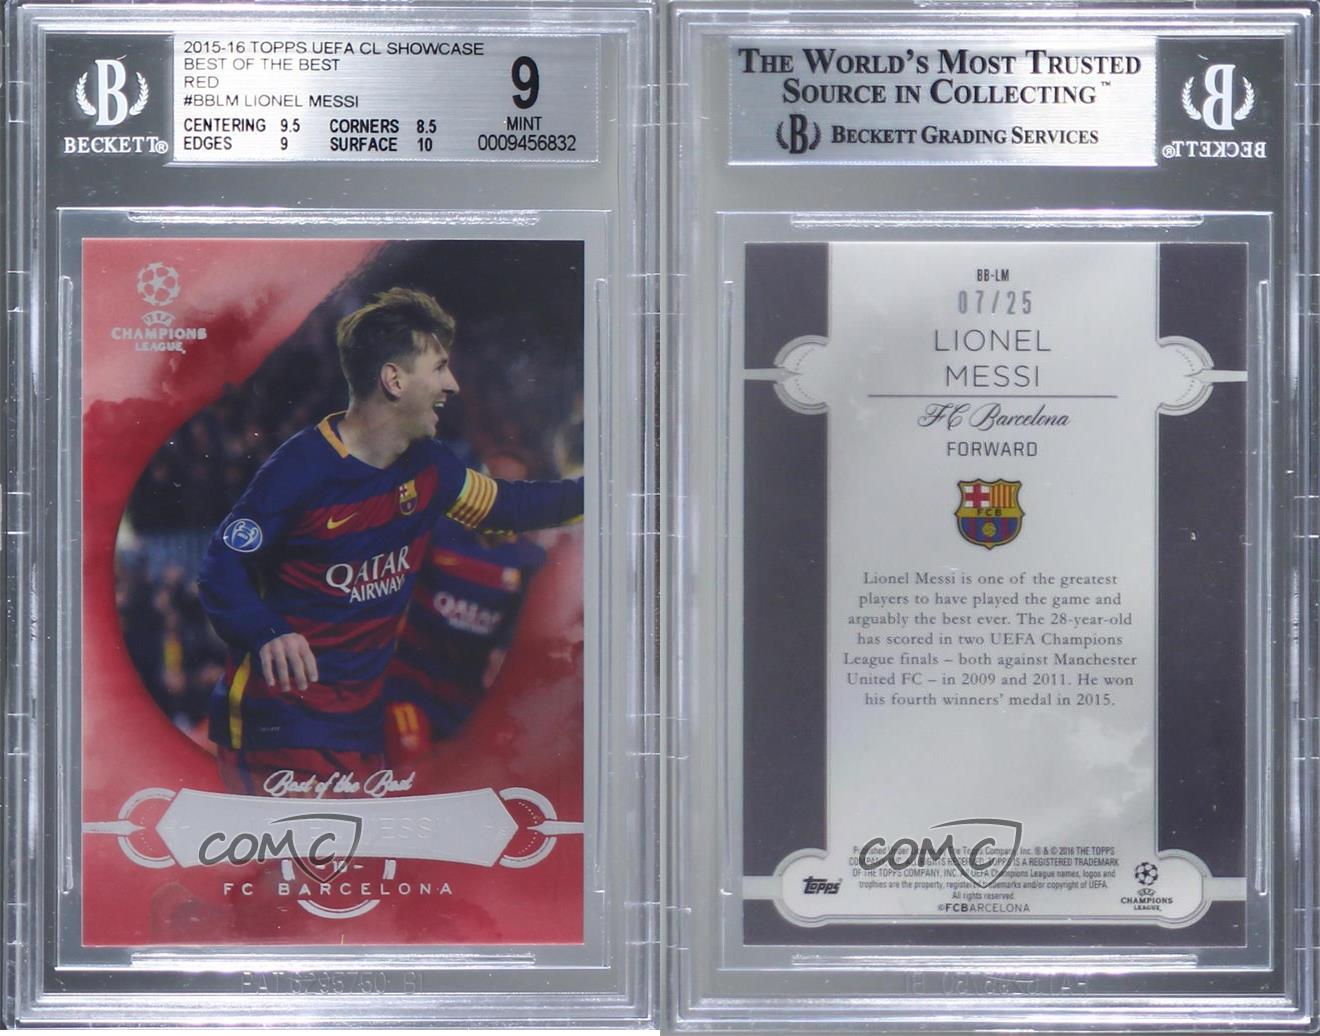 2015-16 Topps UCL Showcase Best of the Red /25 Lionel Messi #BB-LM BGS 9  MINT | eBay